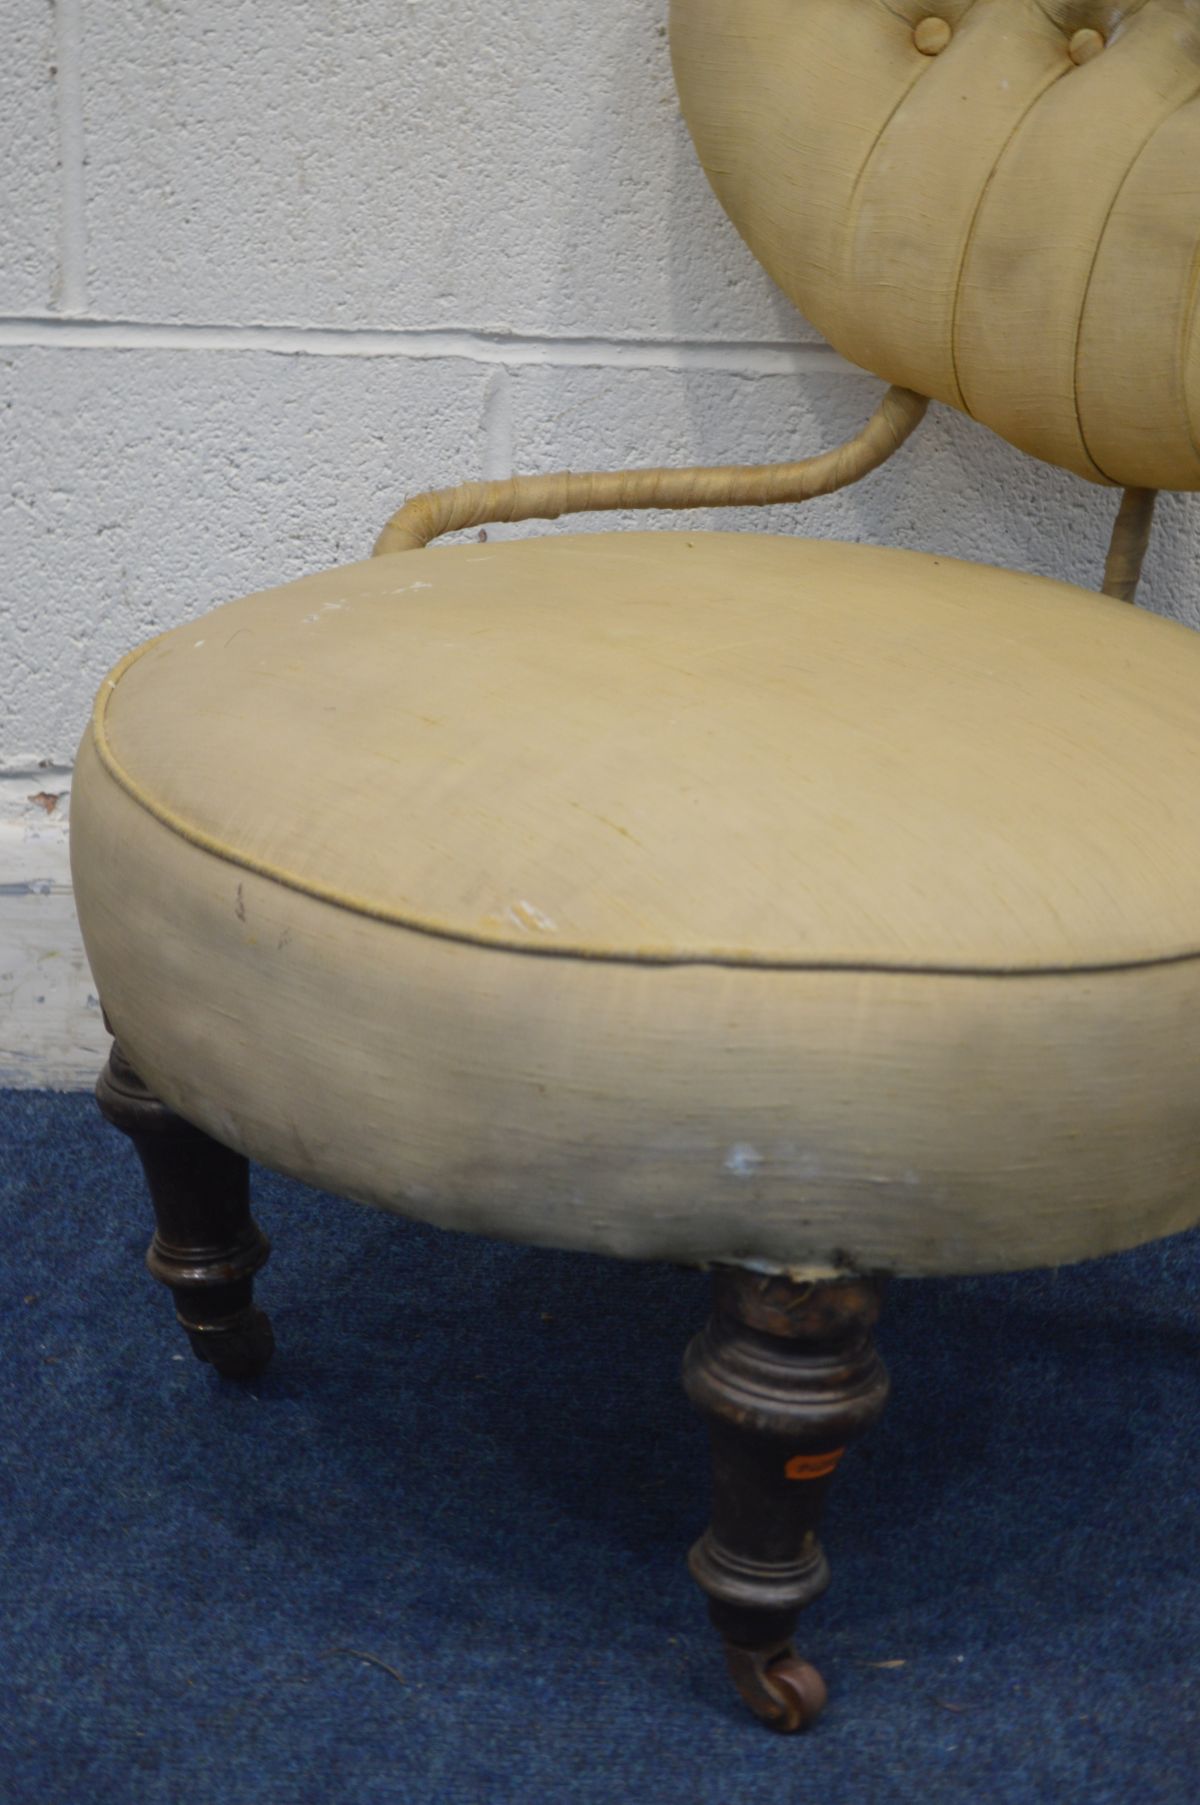 AN EDWARDIAN MAHOGANY BEDROOM CHAIR with an oval buttoned back (sd) - Image 2 of 2